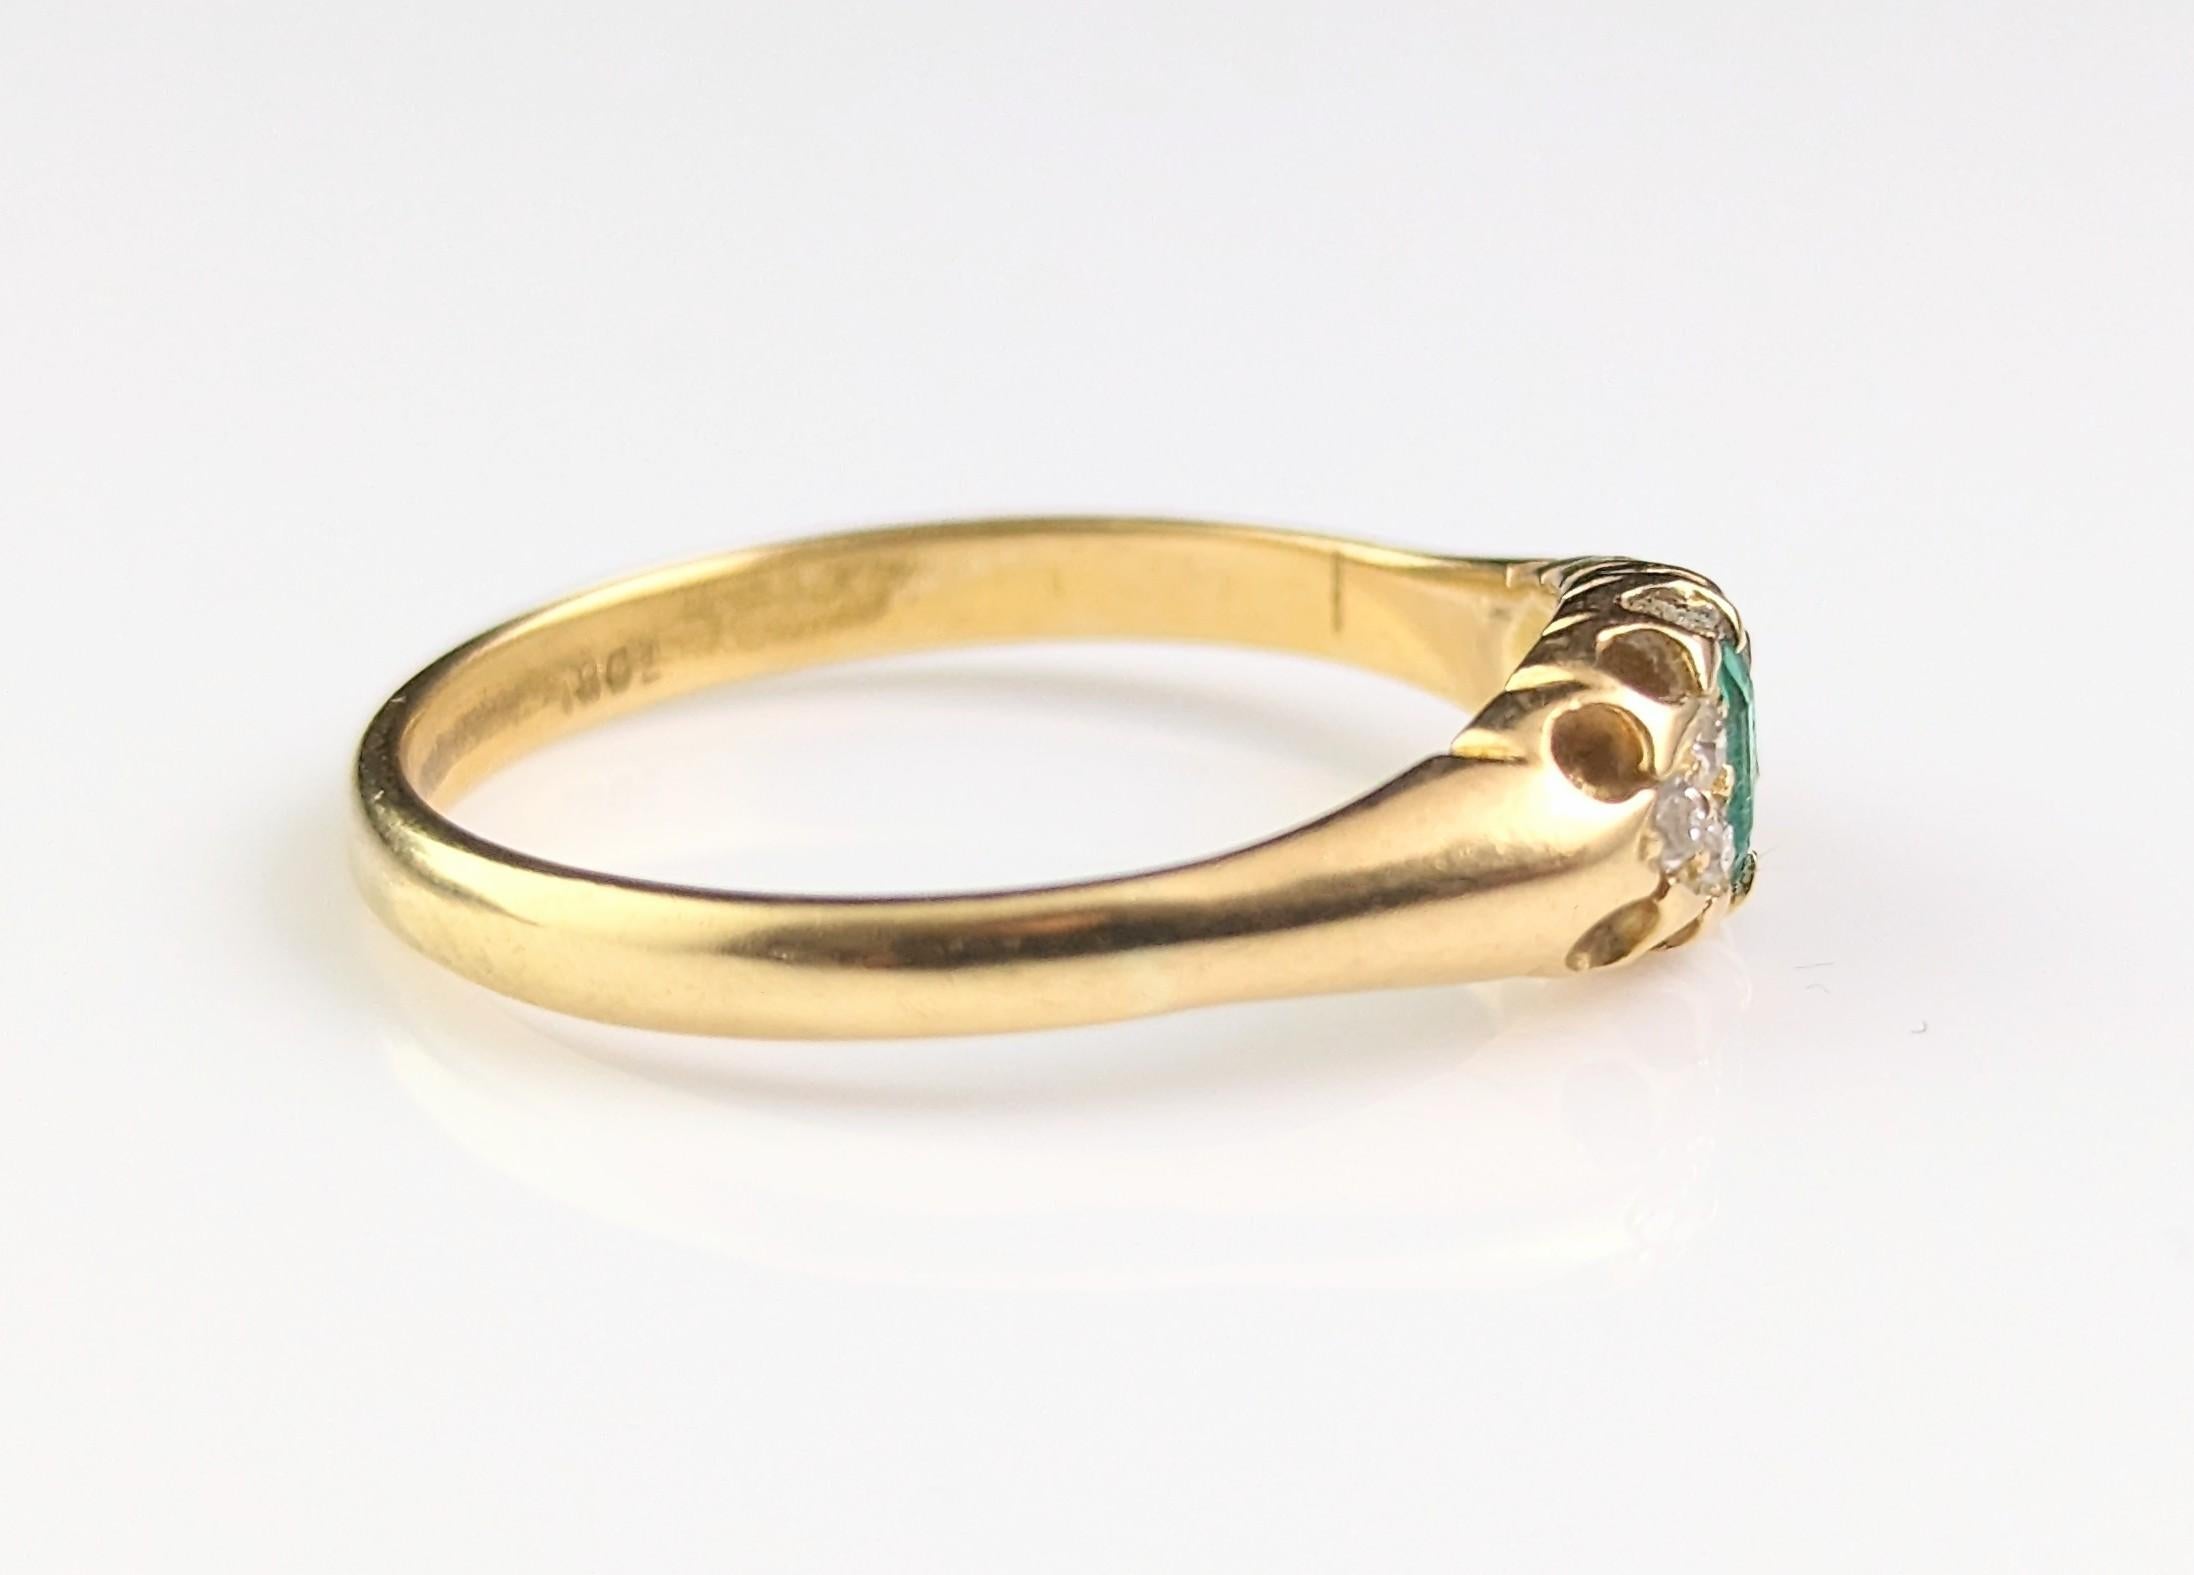 Antique Emerald and Diamond ring, 18k yellow gold, Victorian  7